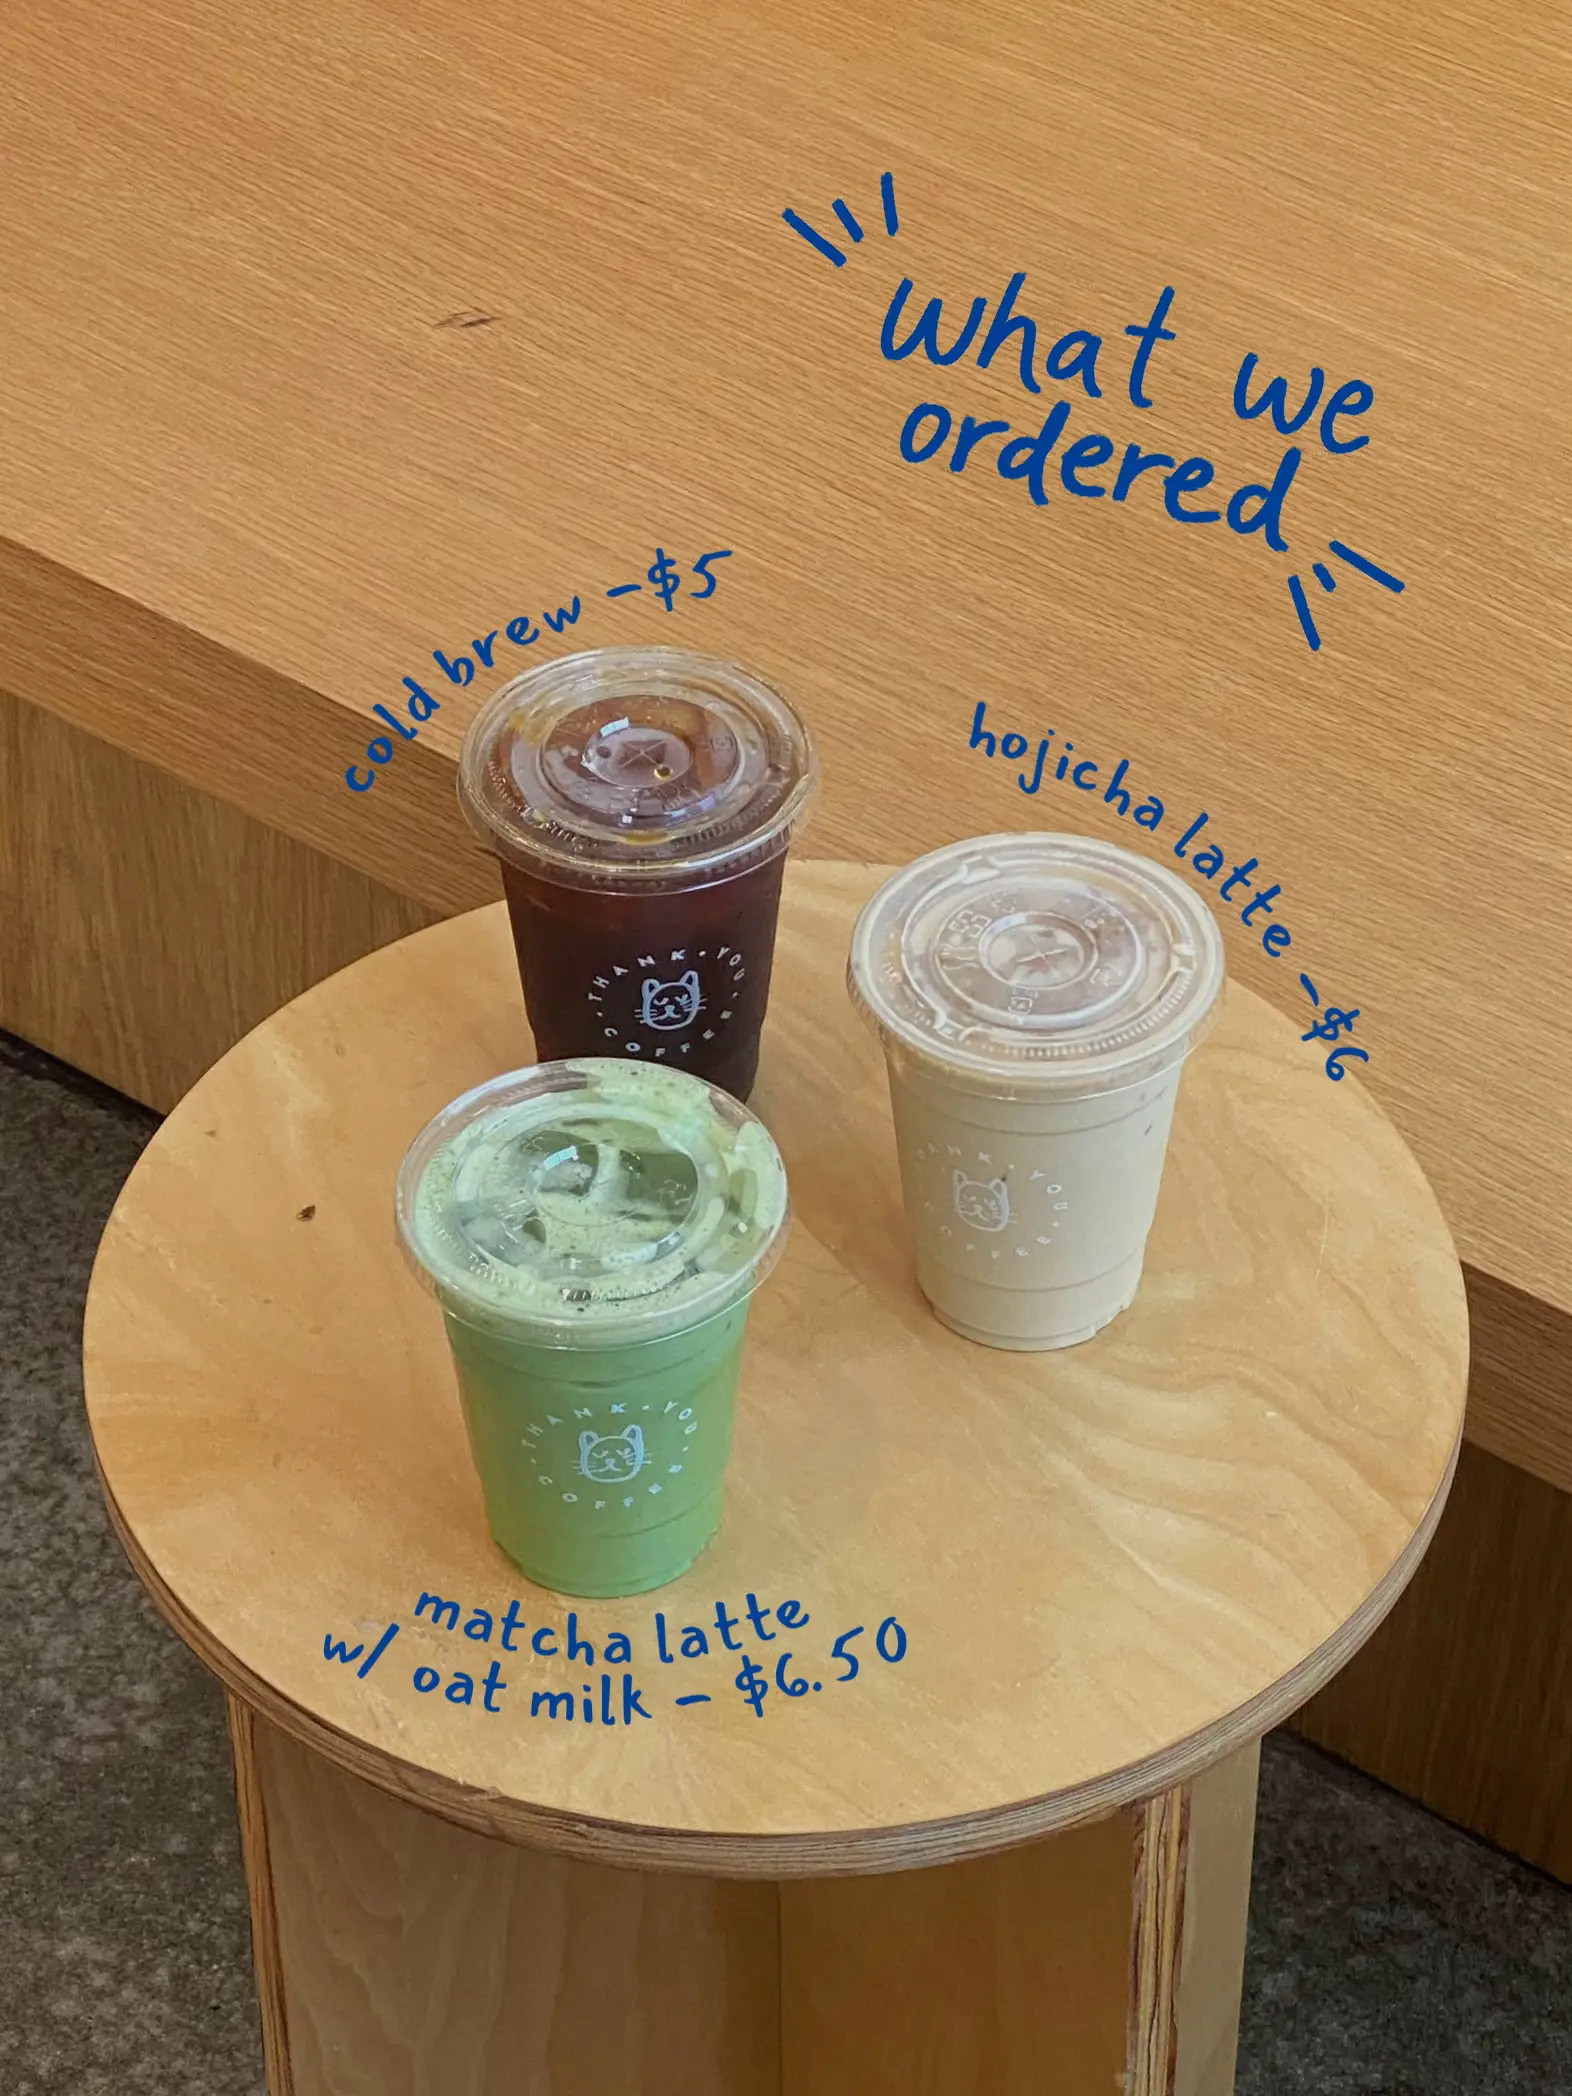  Four cups of tea with different flavors, including a matcha latte.